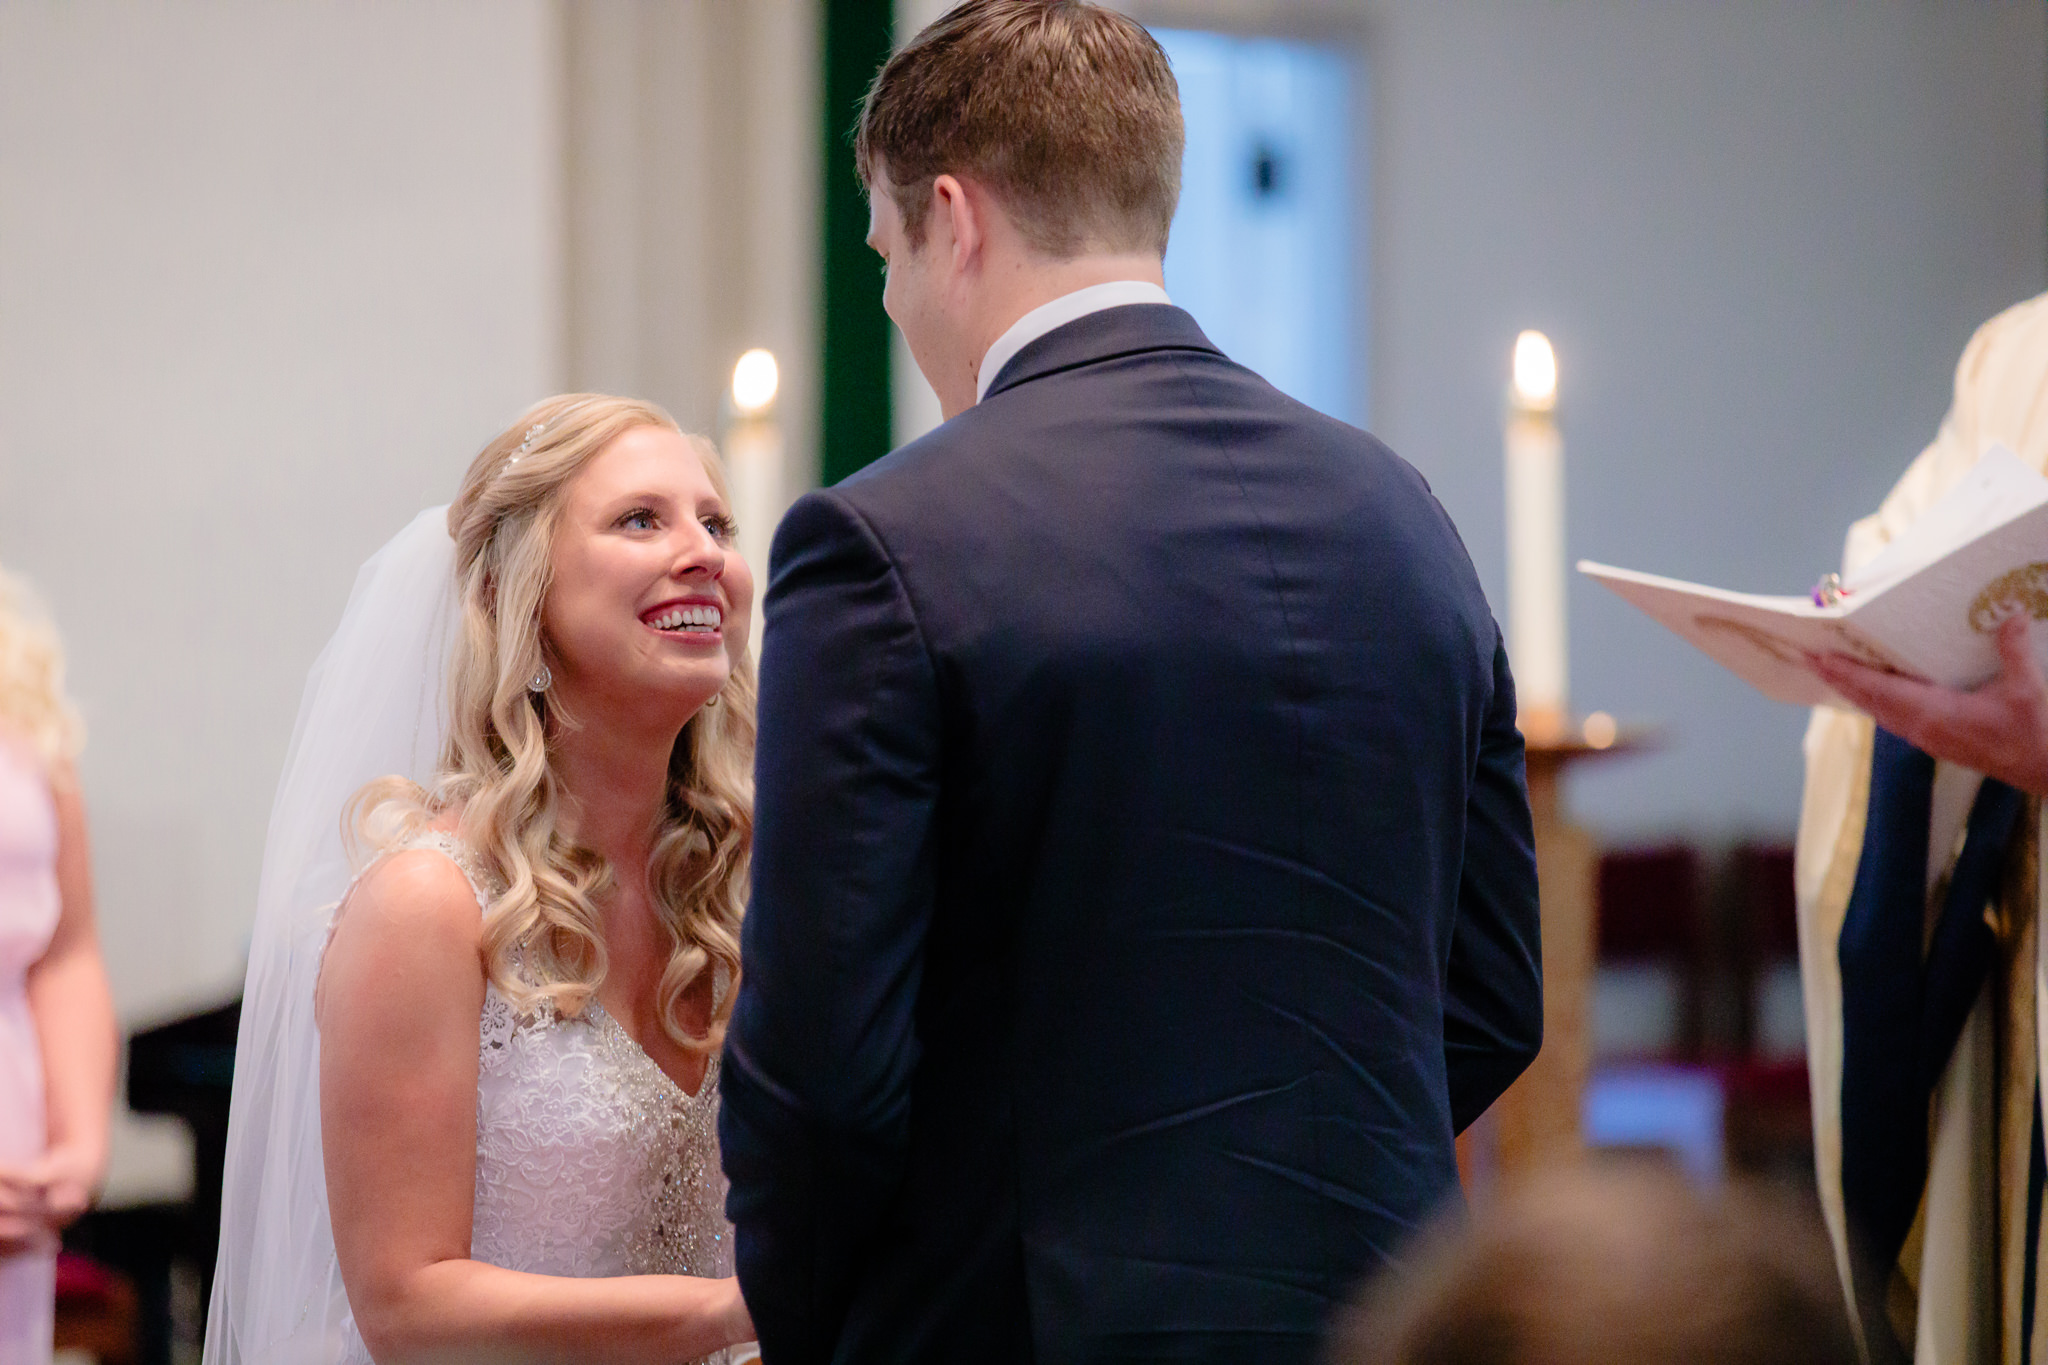 Bride smiles as groom says his vows at Duquesne University Chapel of the Holy Spirit